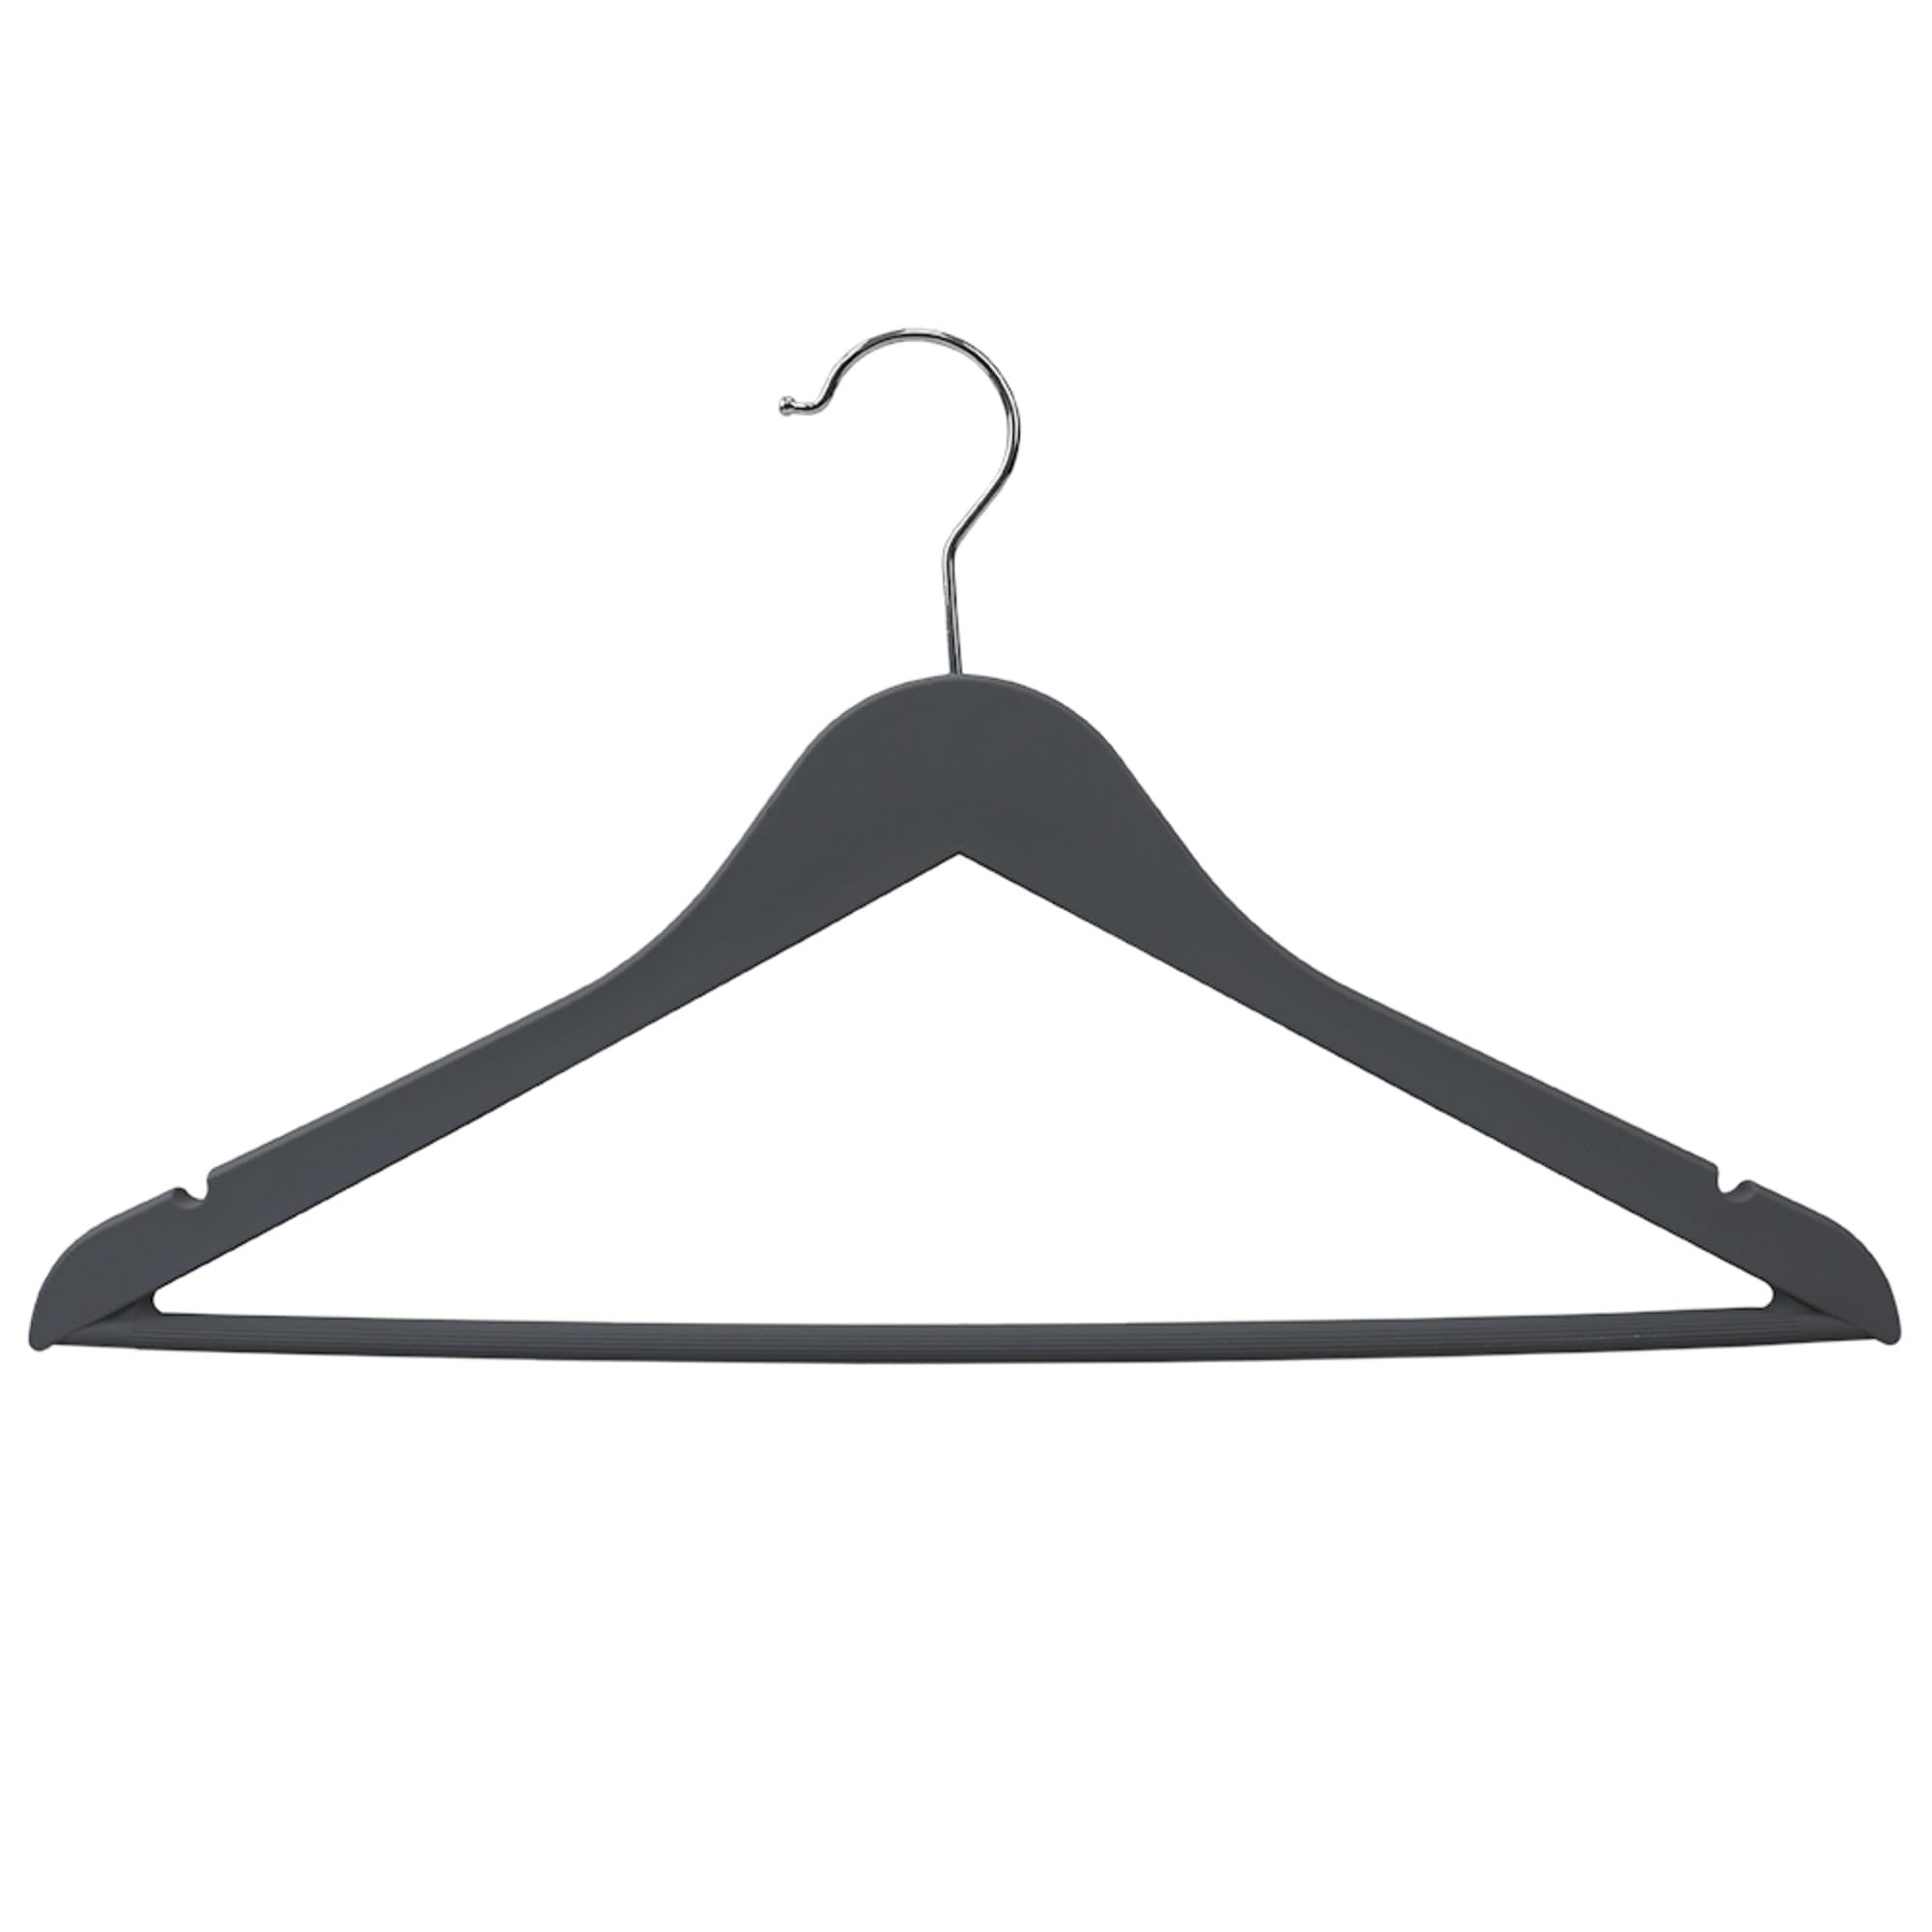 Home Basics Non-Slip Space-Saving Rubberized Plastic Hangers, Charcoal $4.00 EACH, CASE PACK OF 12